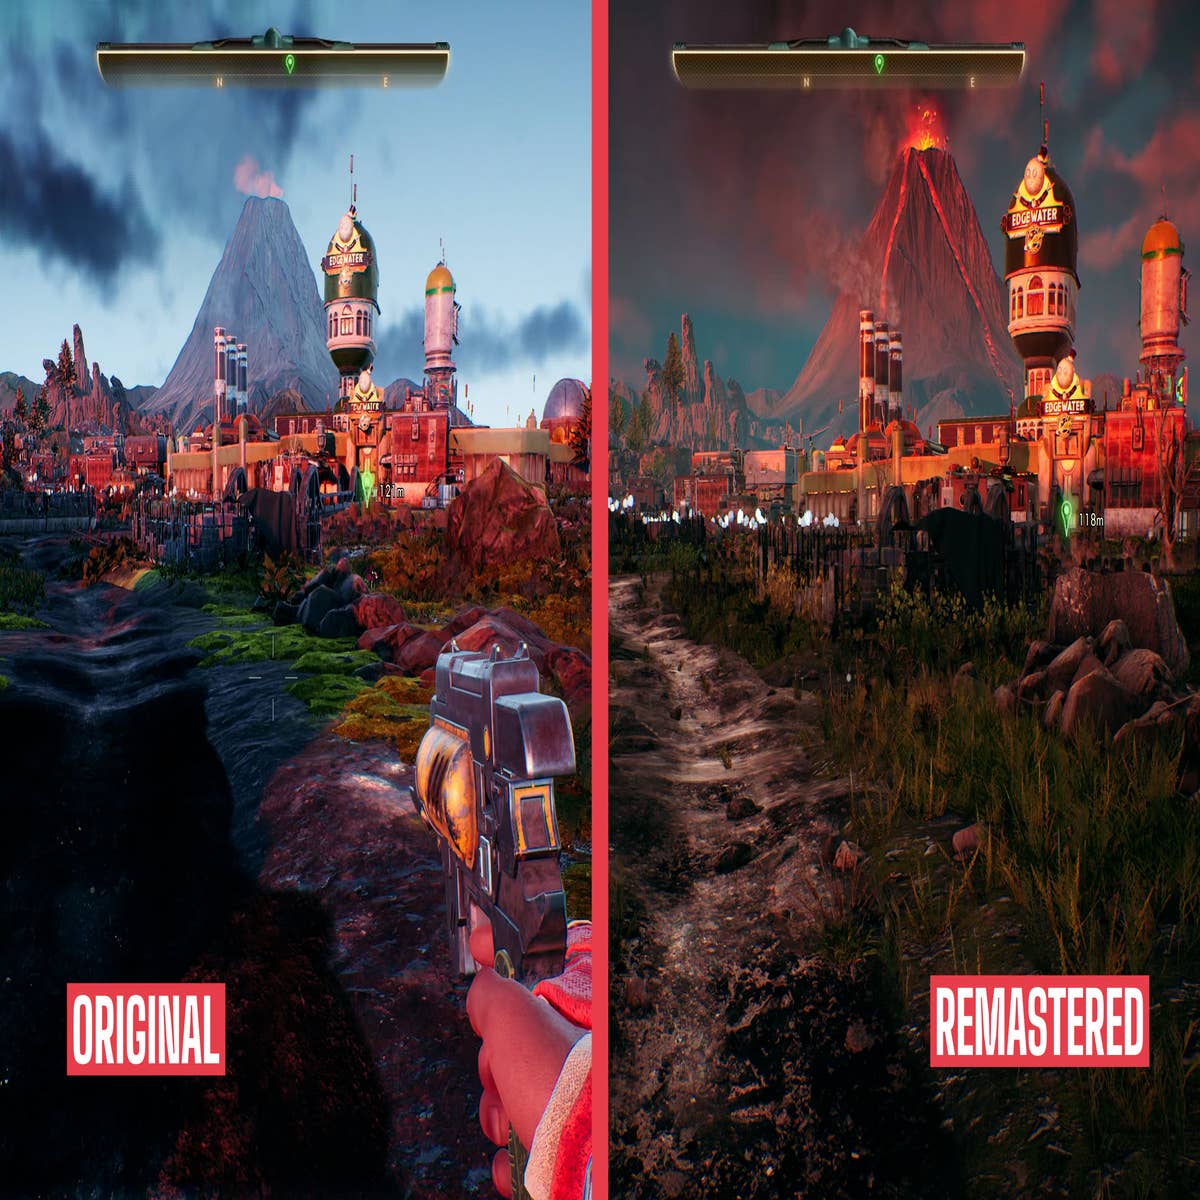 The Outer Worlds: Spacer's Choice Edition brings the RPG to new